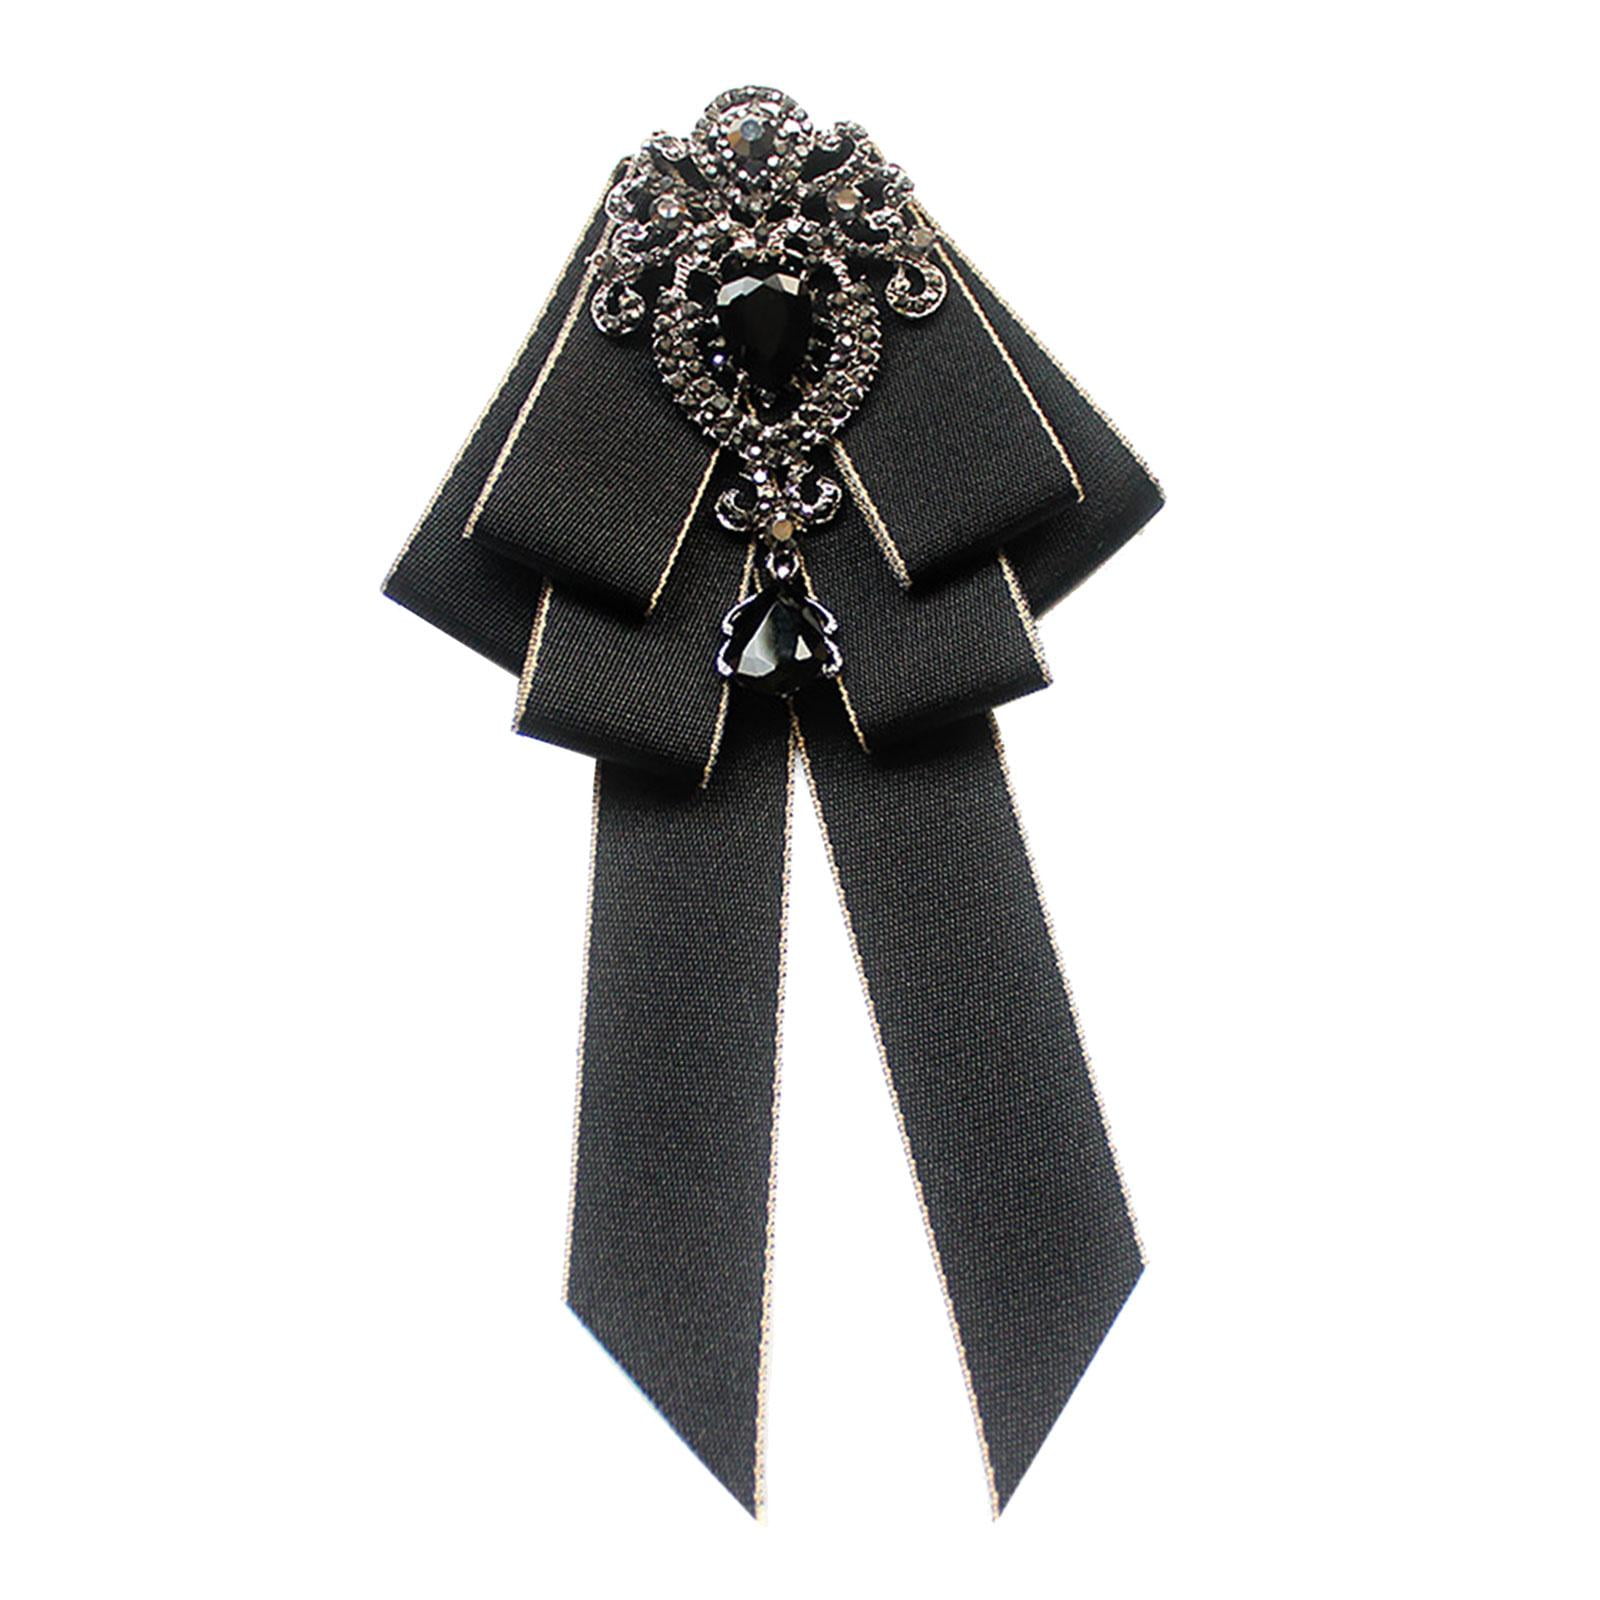 Ribbon Bow Brooch High-grade Brooches Broche Pin Bowknot Bowtie Corsage  Black Ties for Men Crafts Bouquet Wedding Large